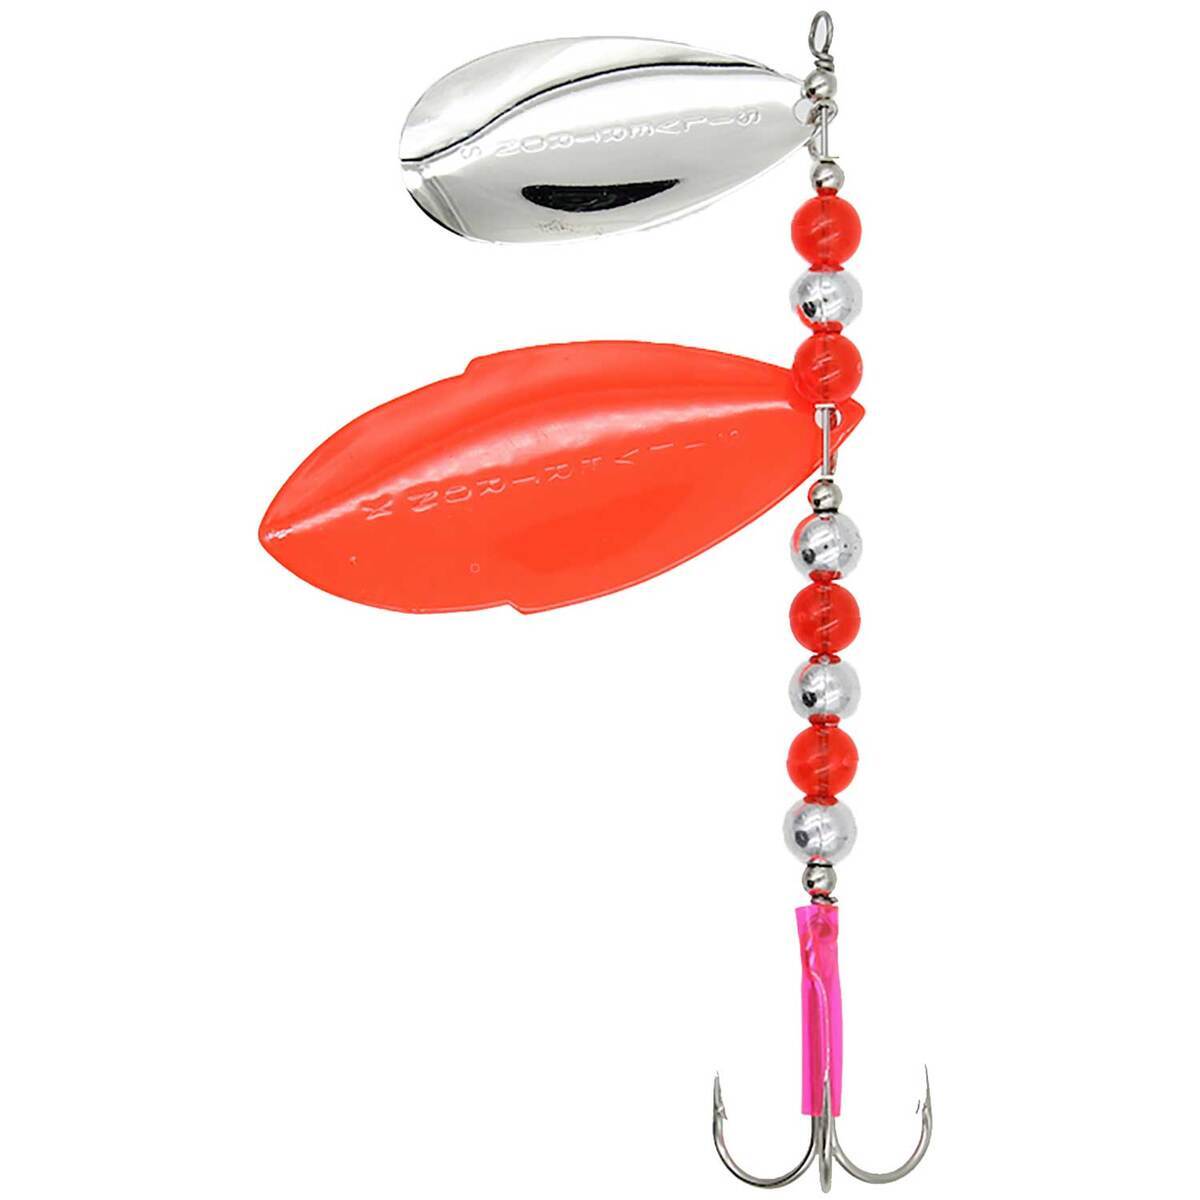 Silvertron Spinner Double Blade Salmon Candy-1